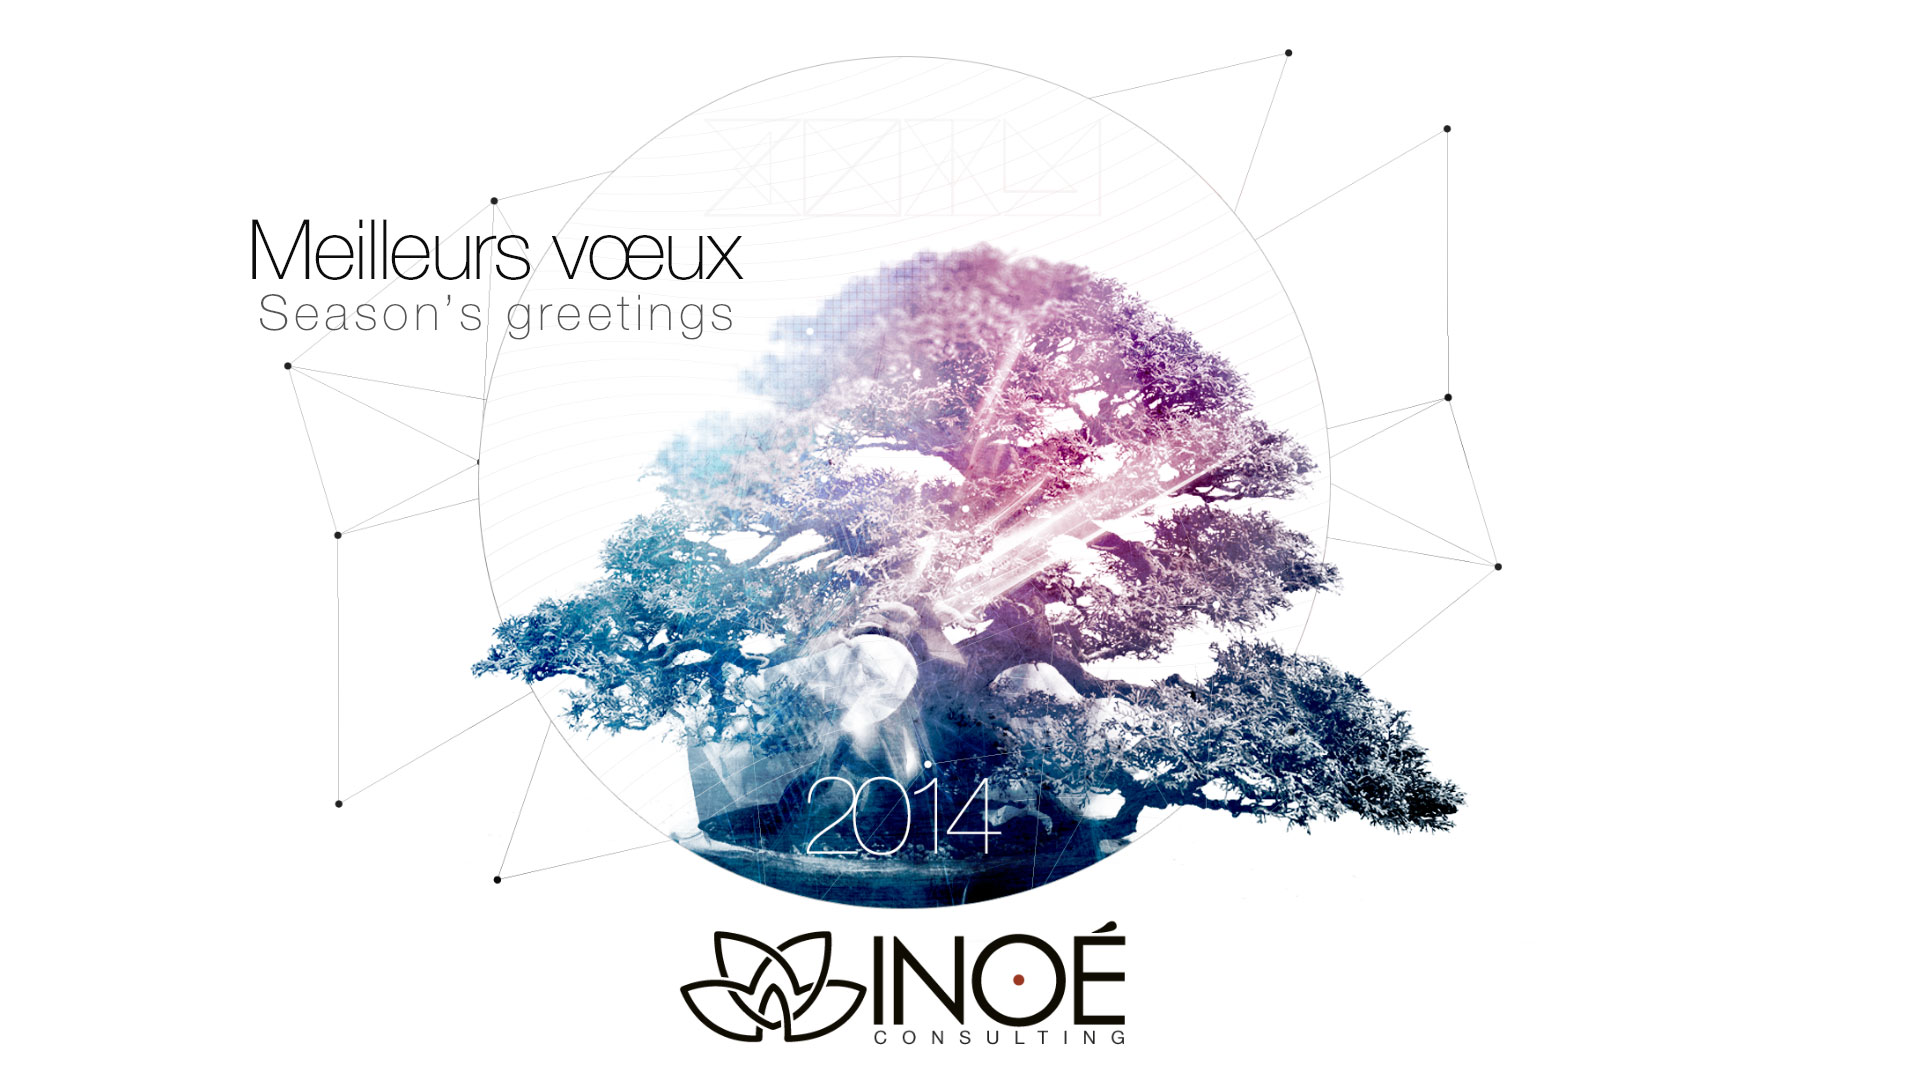 Artwork vœux Inoé consulting